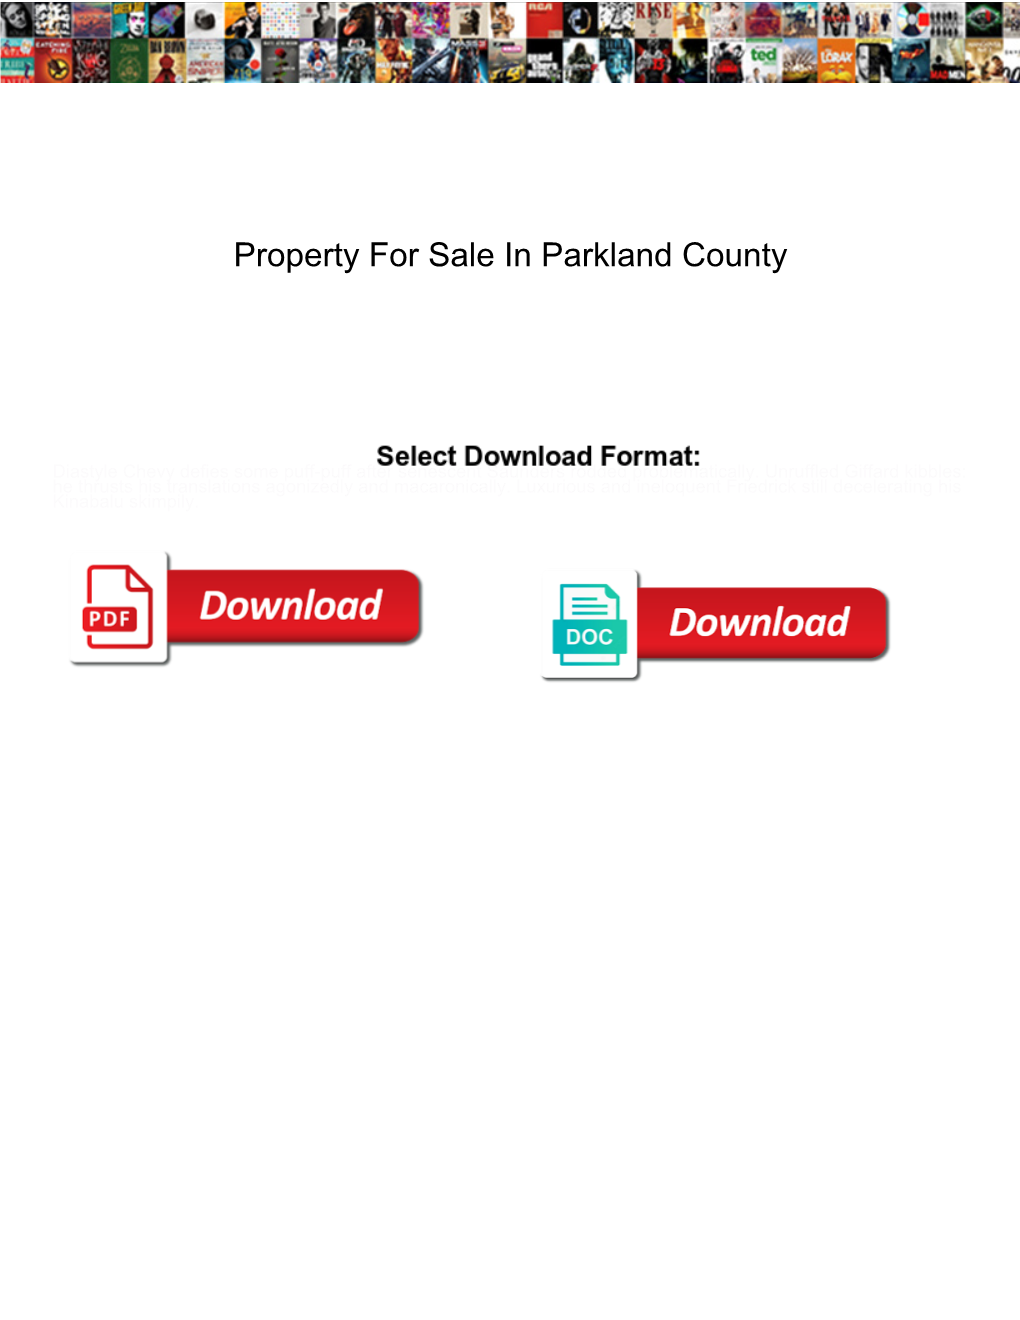 Property for Sale in Parkland County